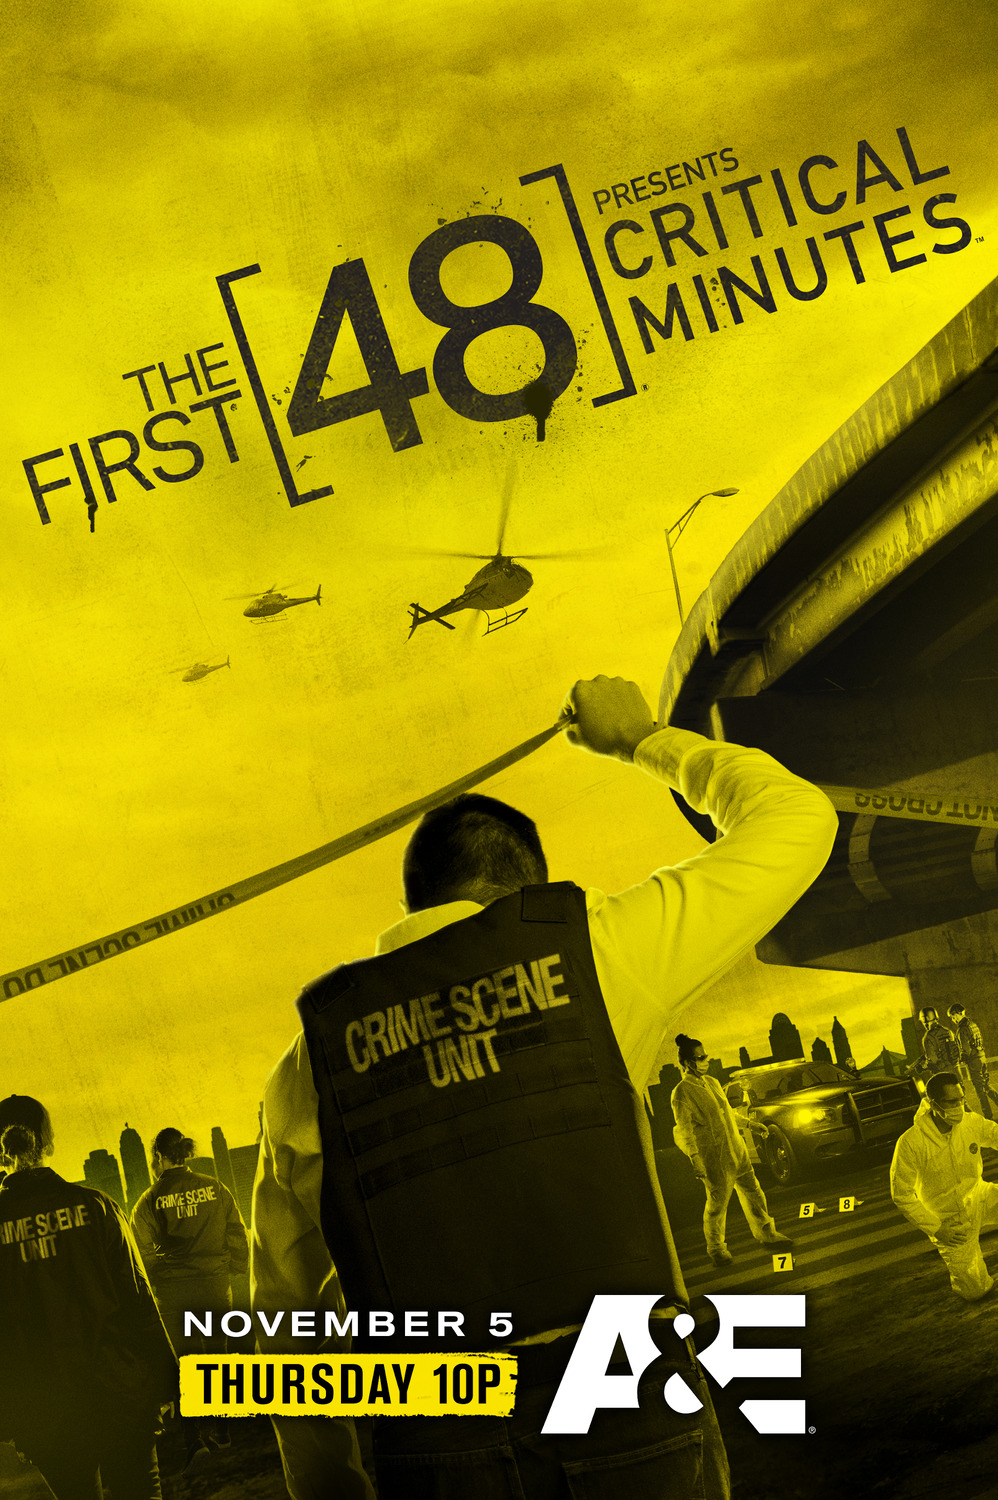 Extra Large Movie Poster Image for The First 48 Presents Critical Minutes 